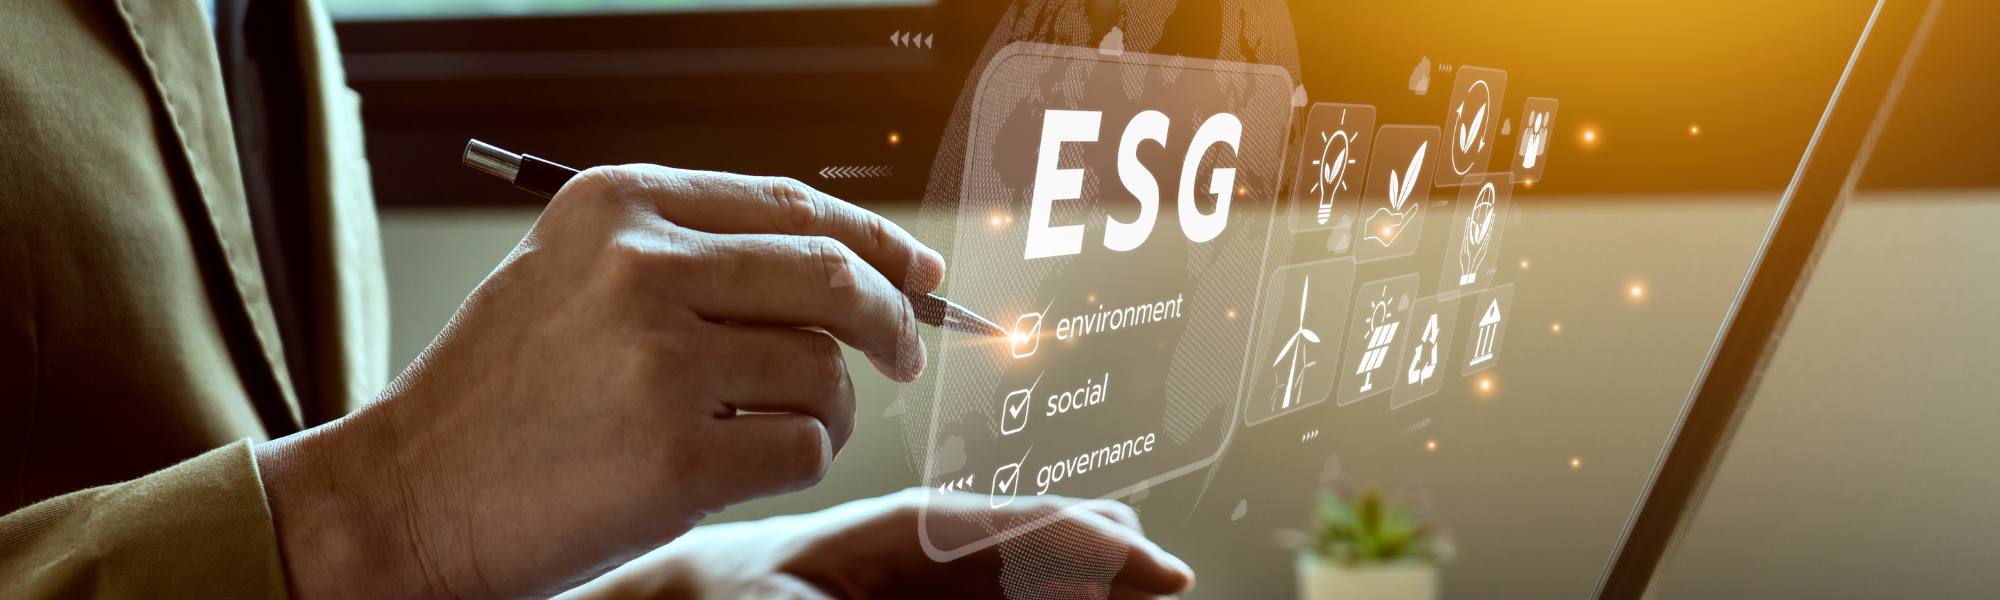 ESG Hires - Top People in Demand in Maritime and Shipping in Singapore - Faststream Recruitment